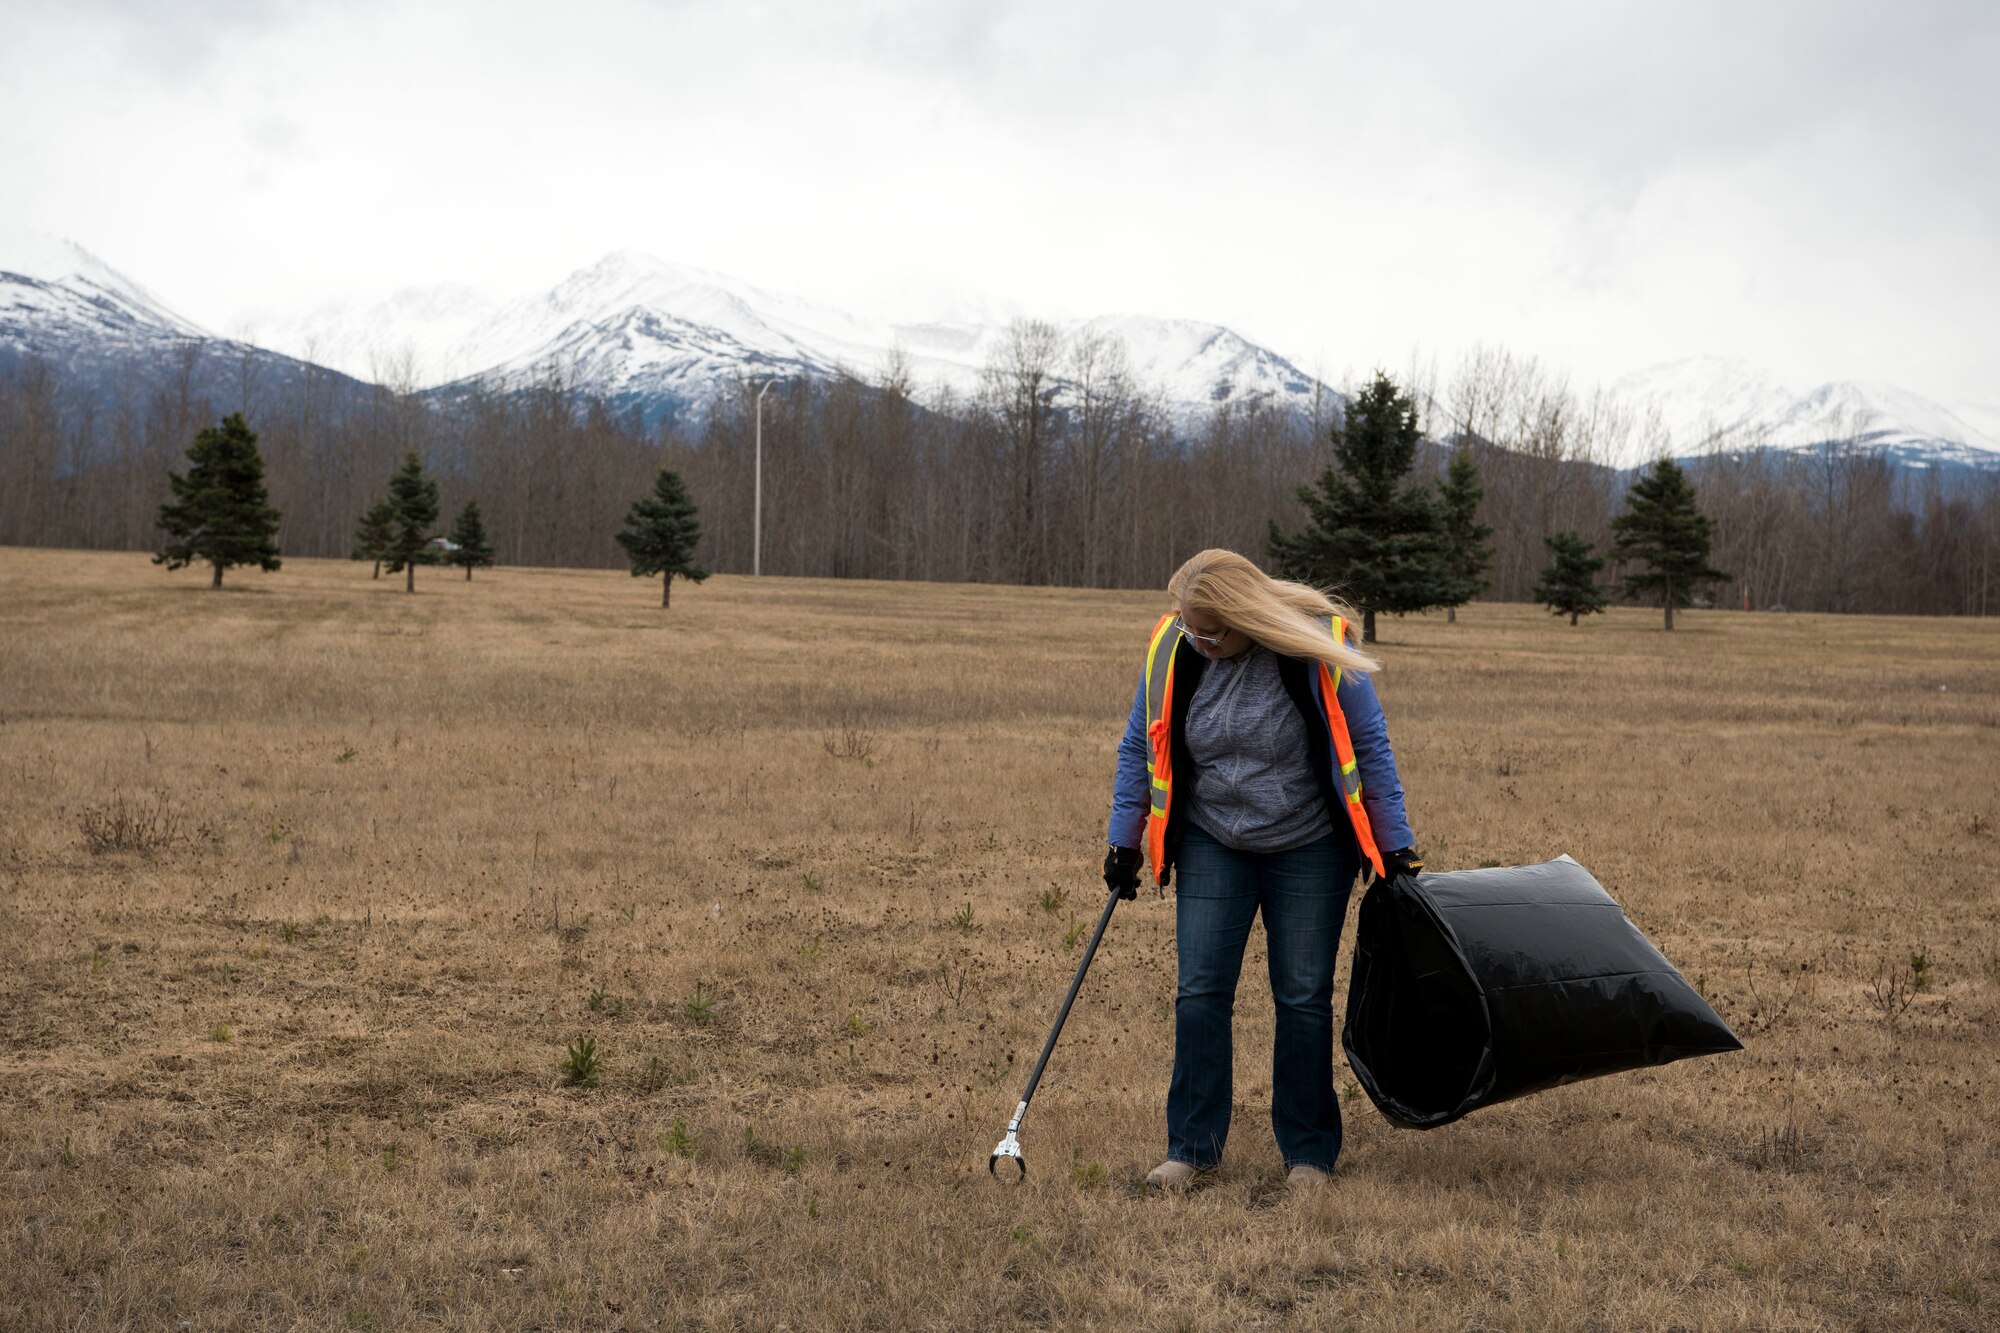 Pam Brunean, an Aurora Military Housing inspector, picks up trash and debris as she walks in a neighborhood at Joint Base Elmendorf-Richardson, Alaska, May 3, 2018. JBER participated in Operation Clean Sweep in support of the Anchorage Chamber of Commerce's 50th Annual Citywide Cleanup campaign.